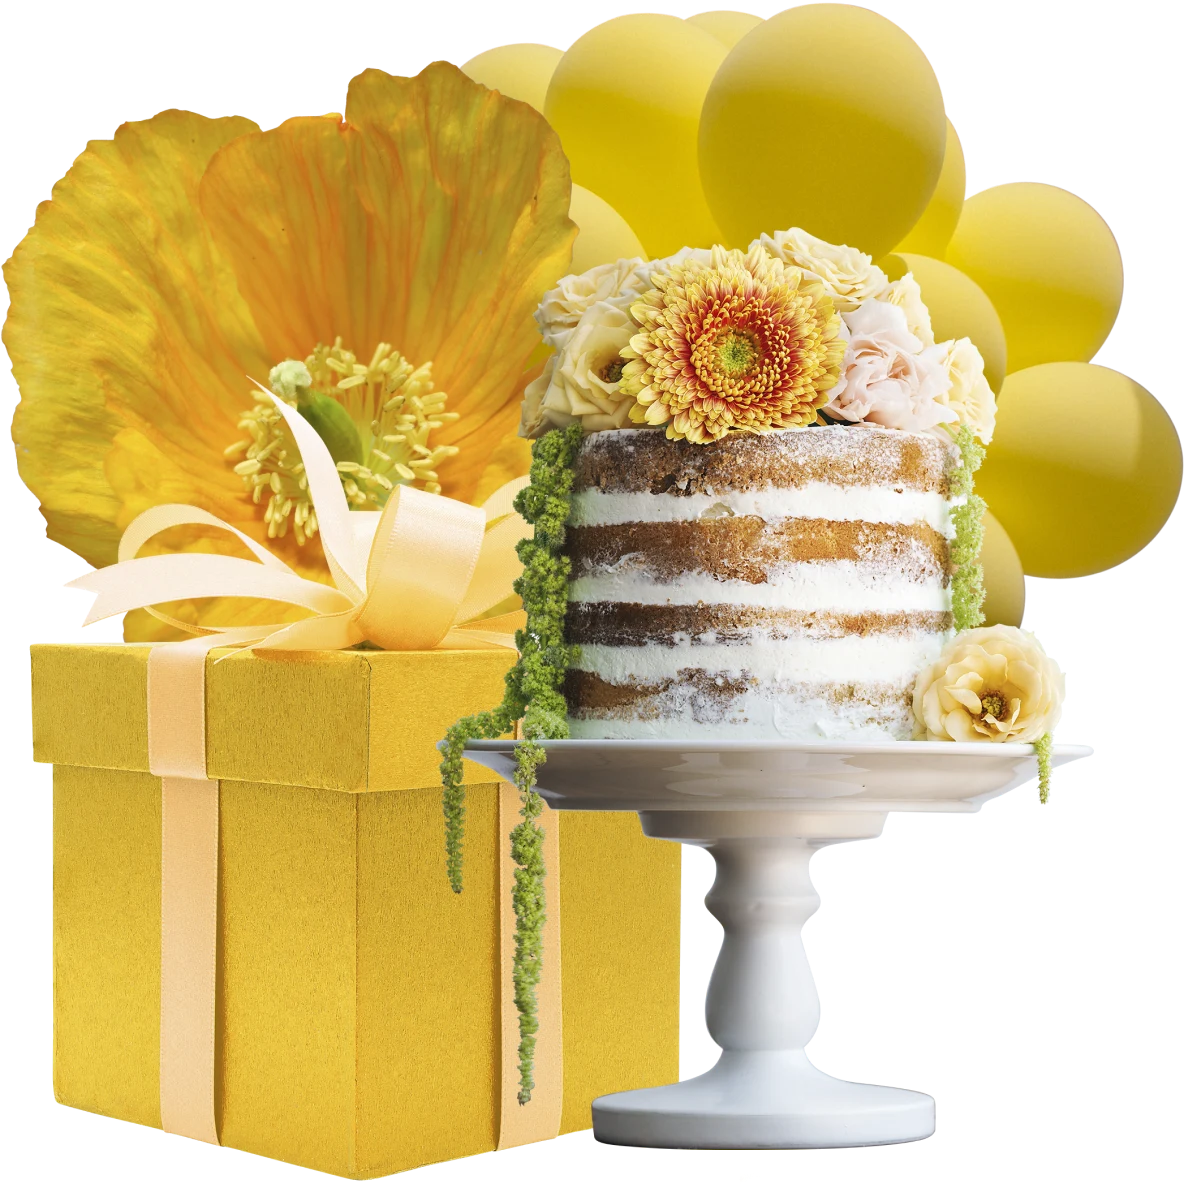 Collage of party items. A four-layer white cake on a pedestal on the right. A large yellow box with pink ribbon on the left. A background of large yellow flower and yellow balloons.